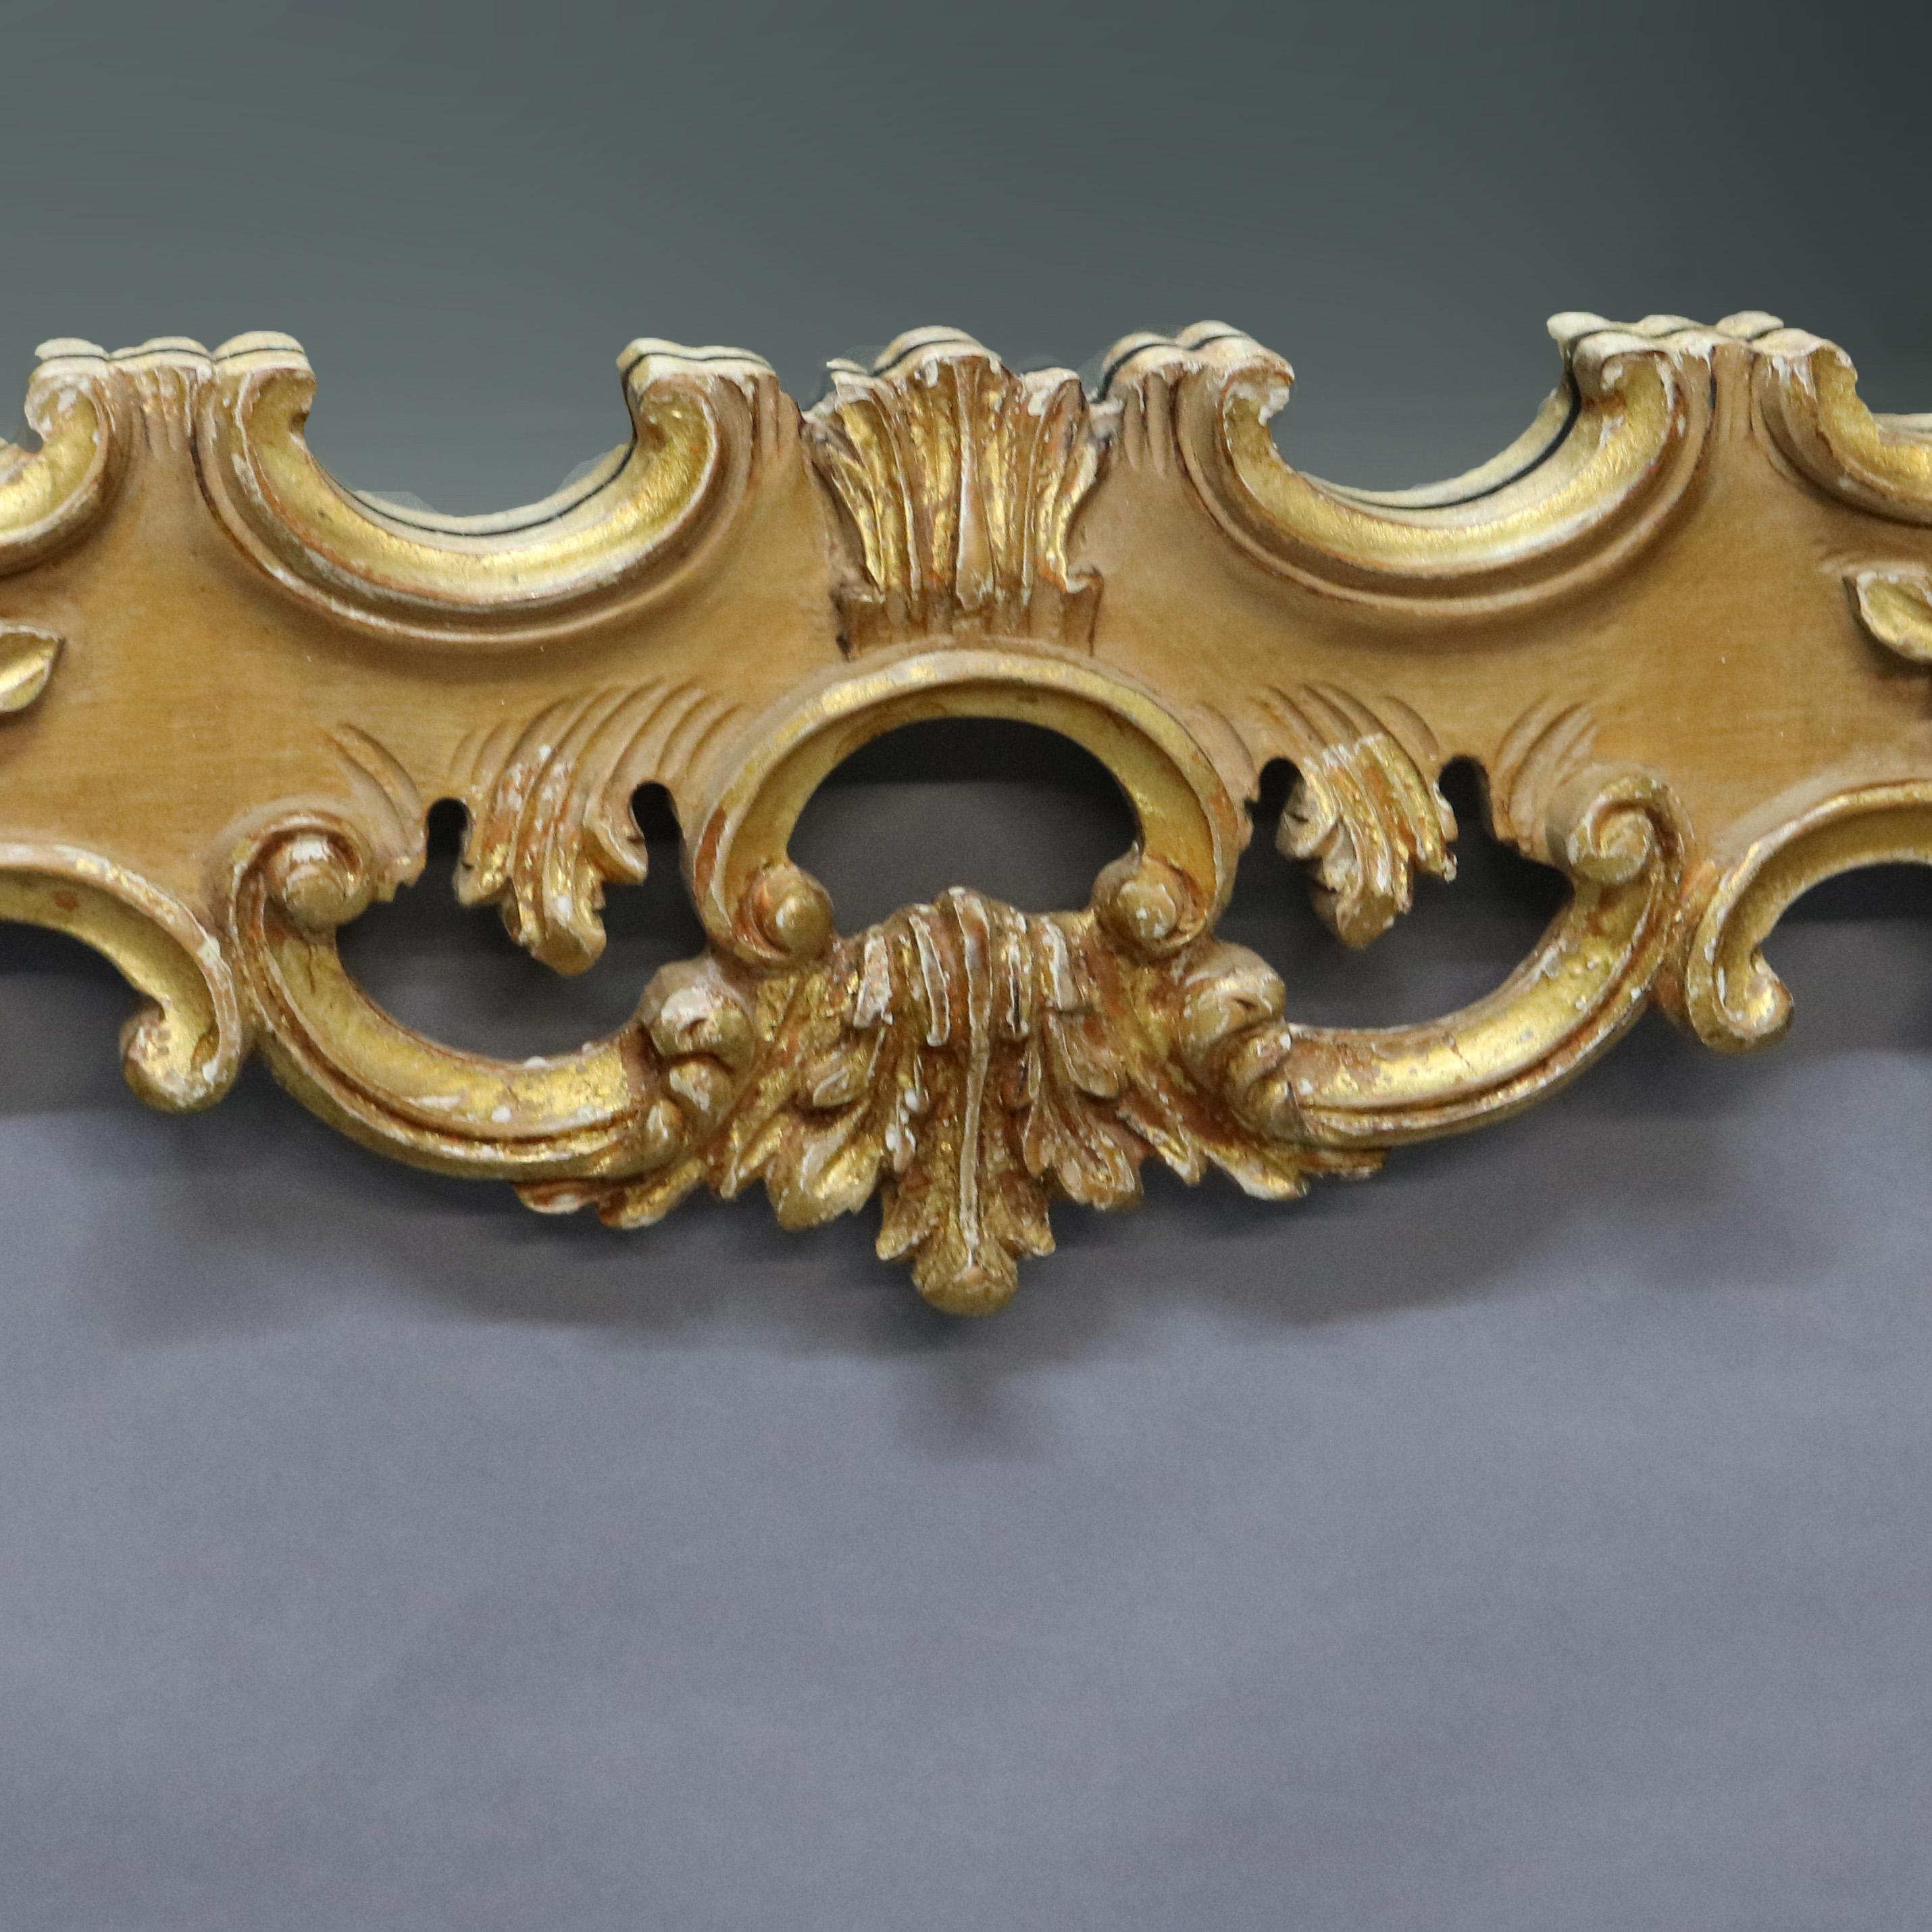 Antique Oversized Italian Rococo Revival Giltwood Over Mantel Wall Mirror 20th C 2